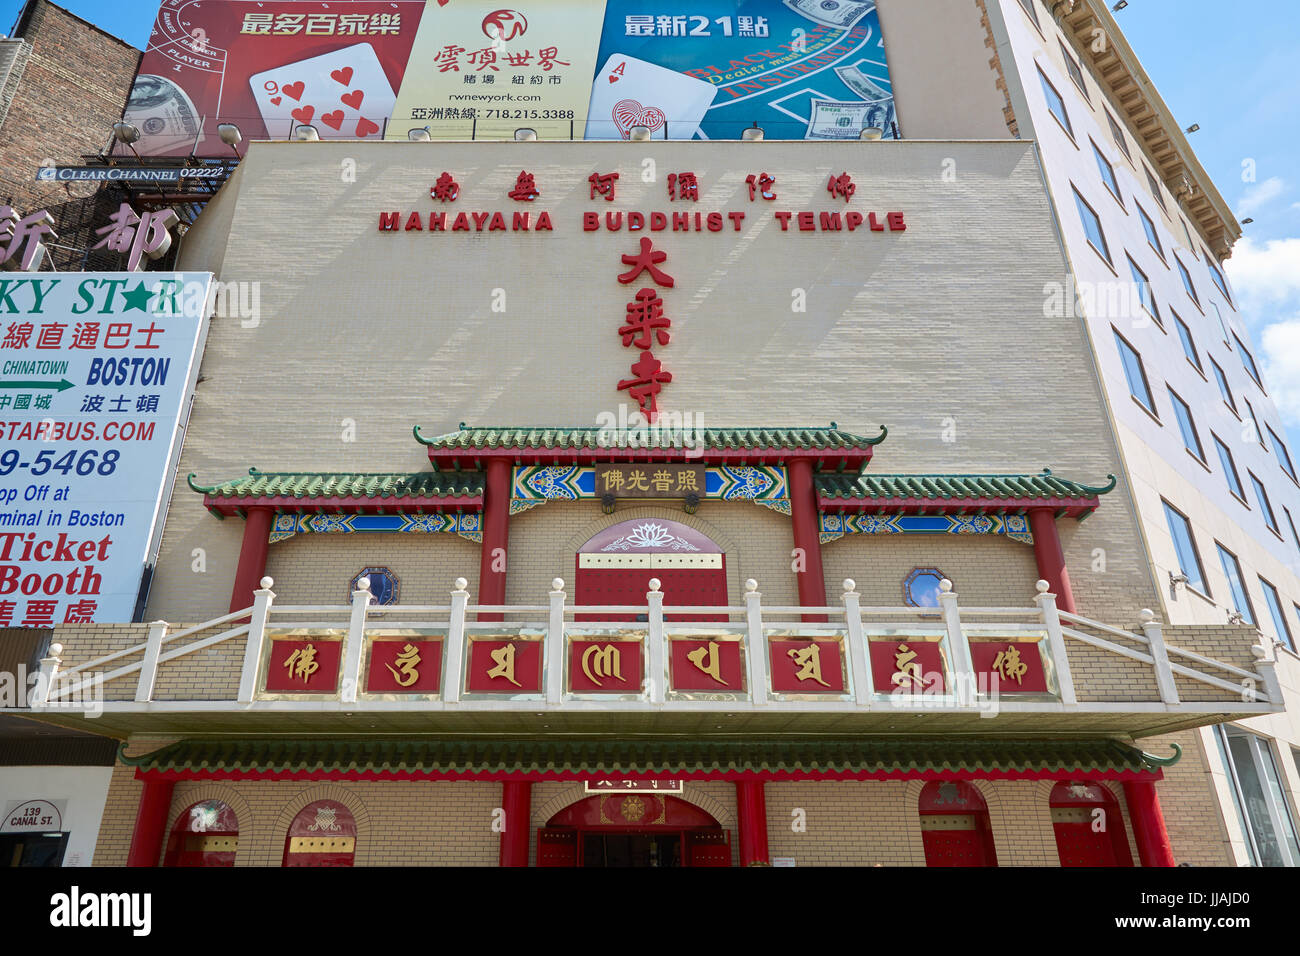 Mahayana Buddhist Temple facade with advertising billboards in a sunny day in New York Stock Photo